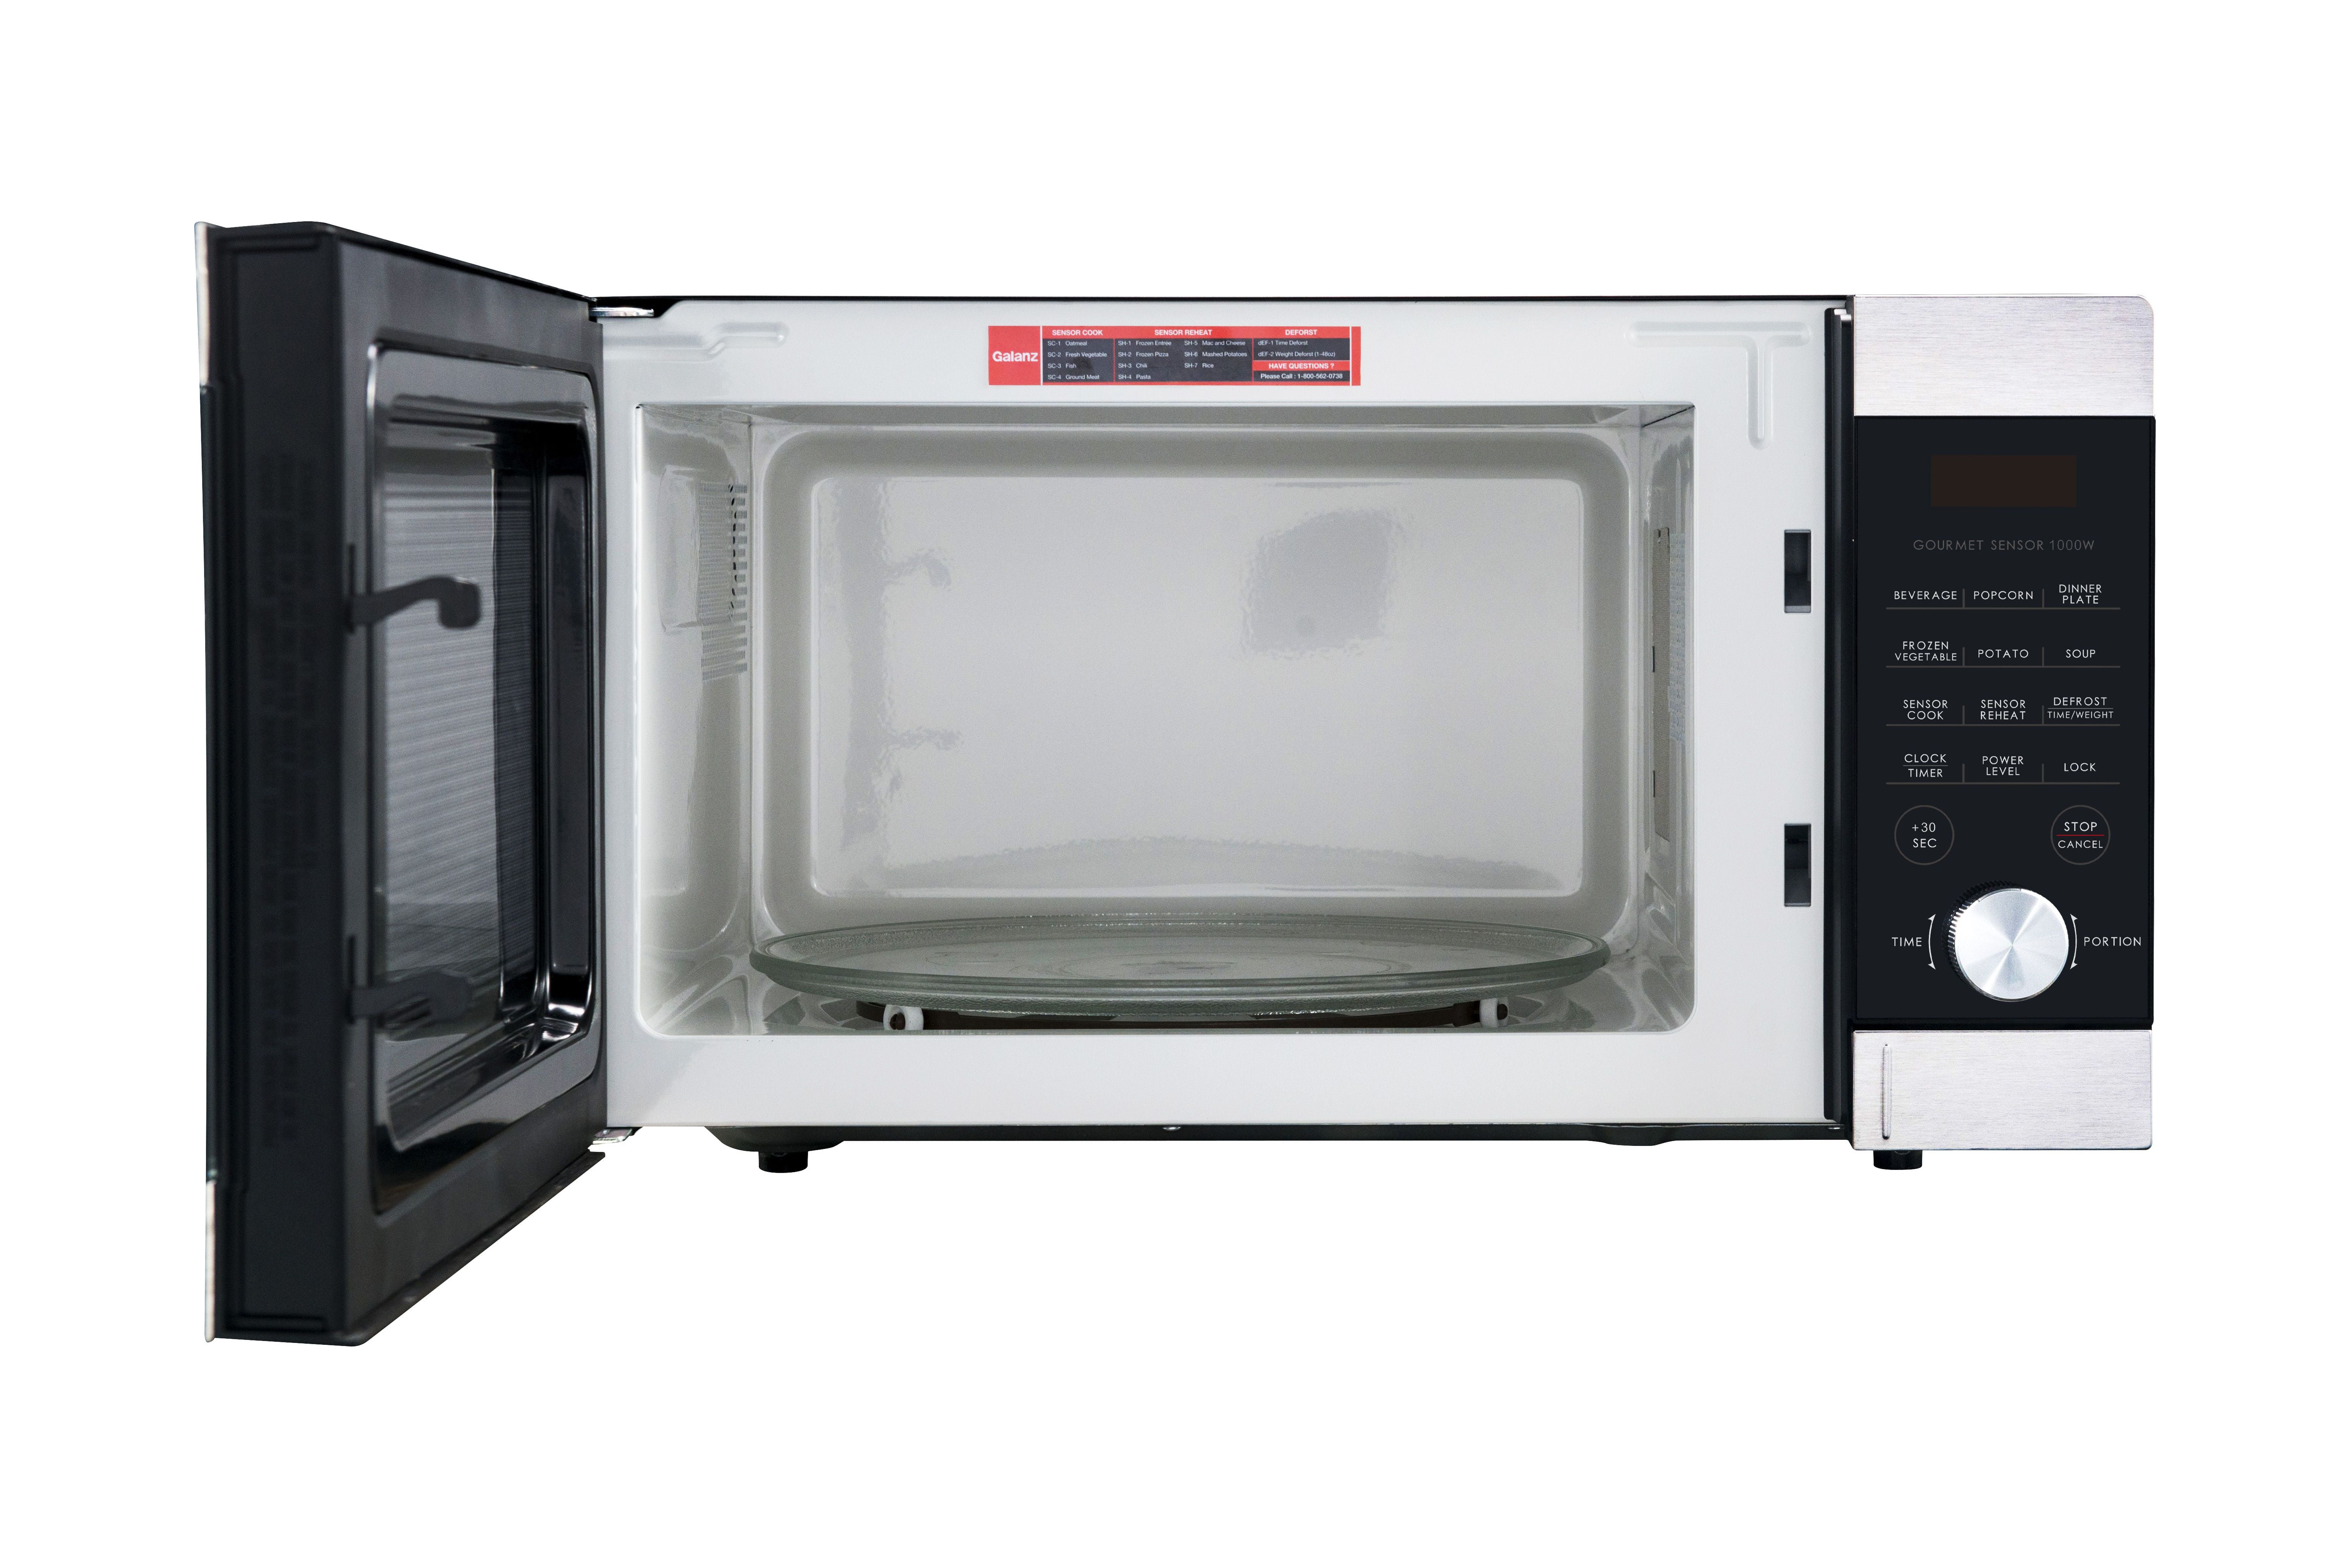 Galanz Express Wave 1.1 cu. ft. Sensor Cook Countertop Microwave Oven, 1000 Watts, Stainless Steel, New - image 5 of 10